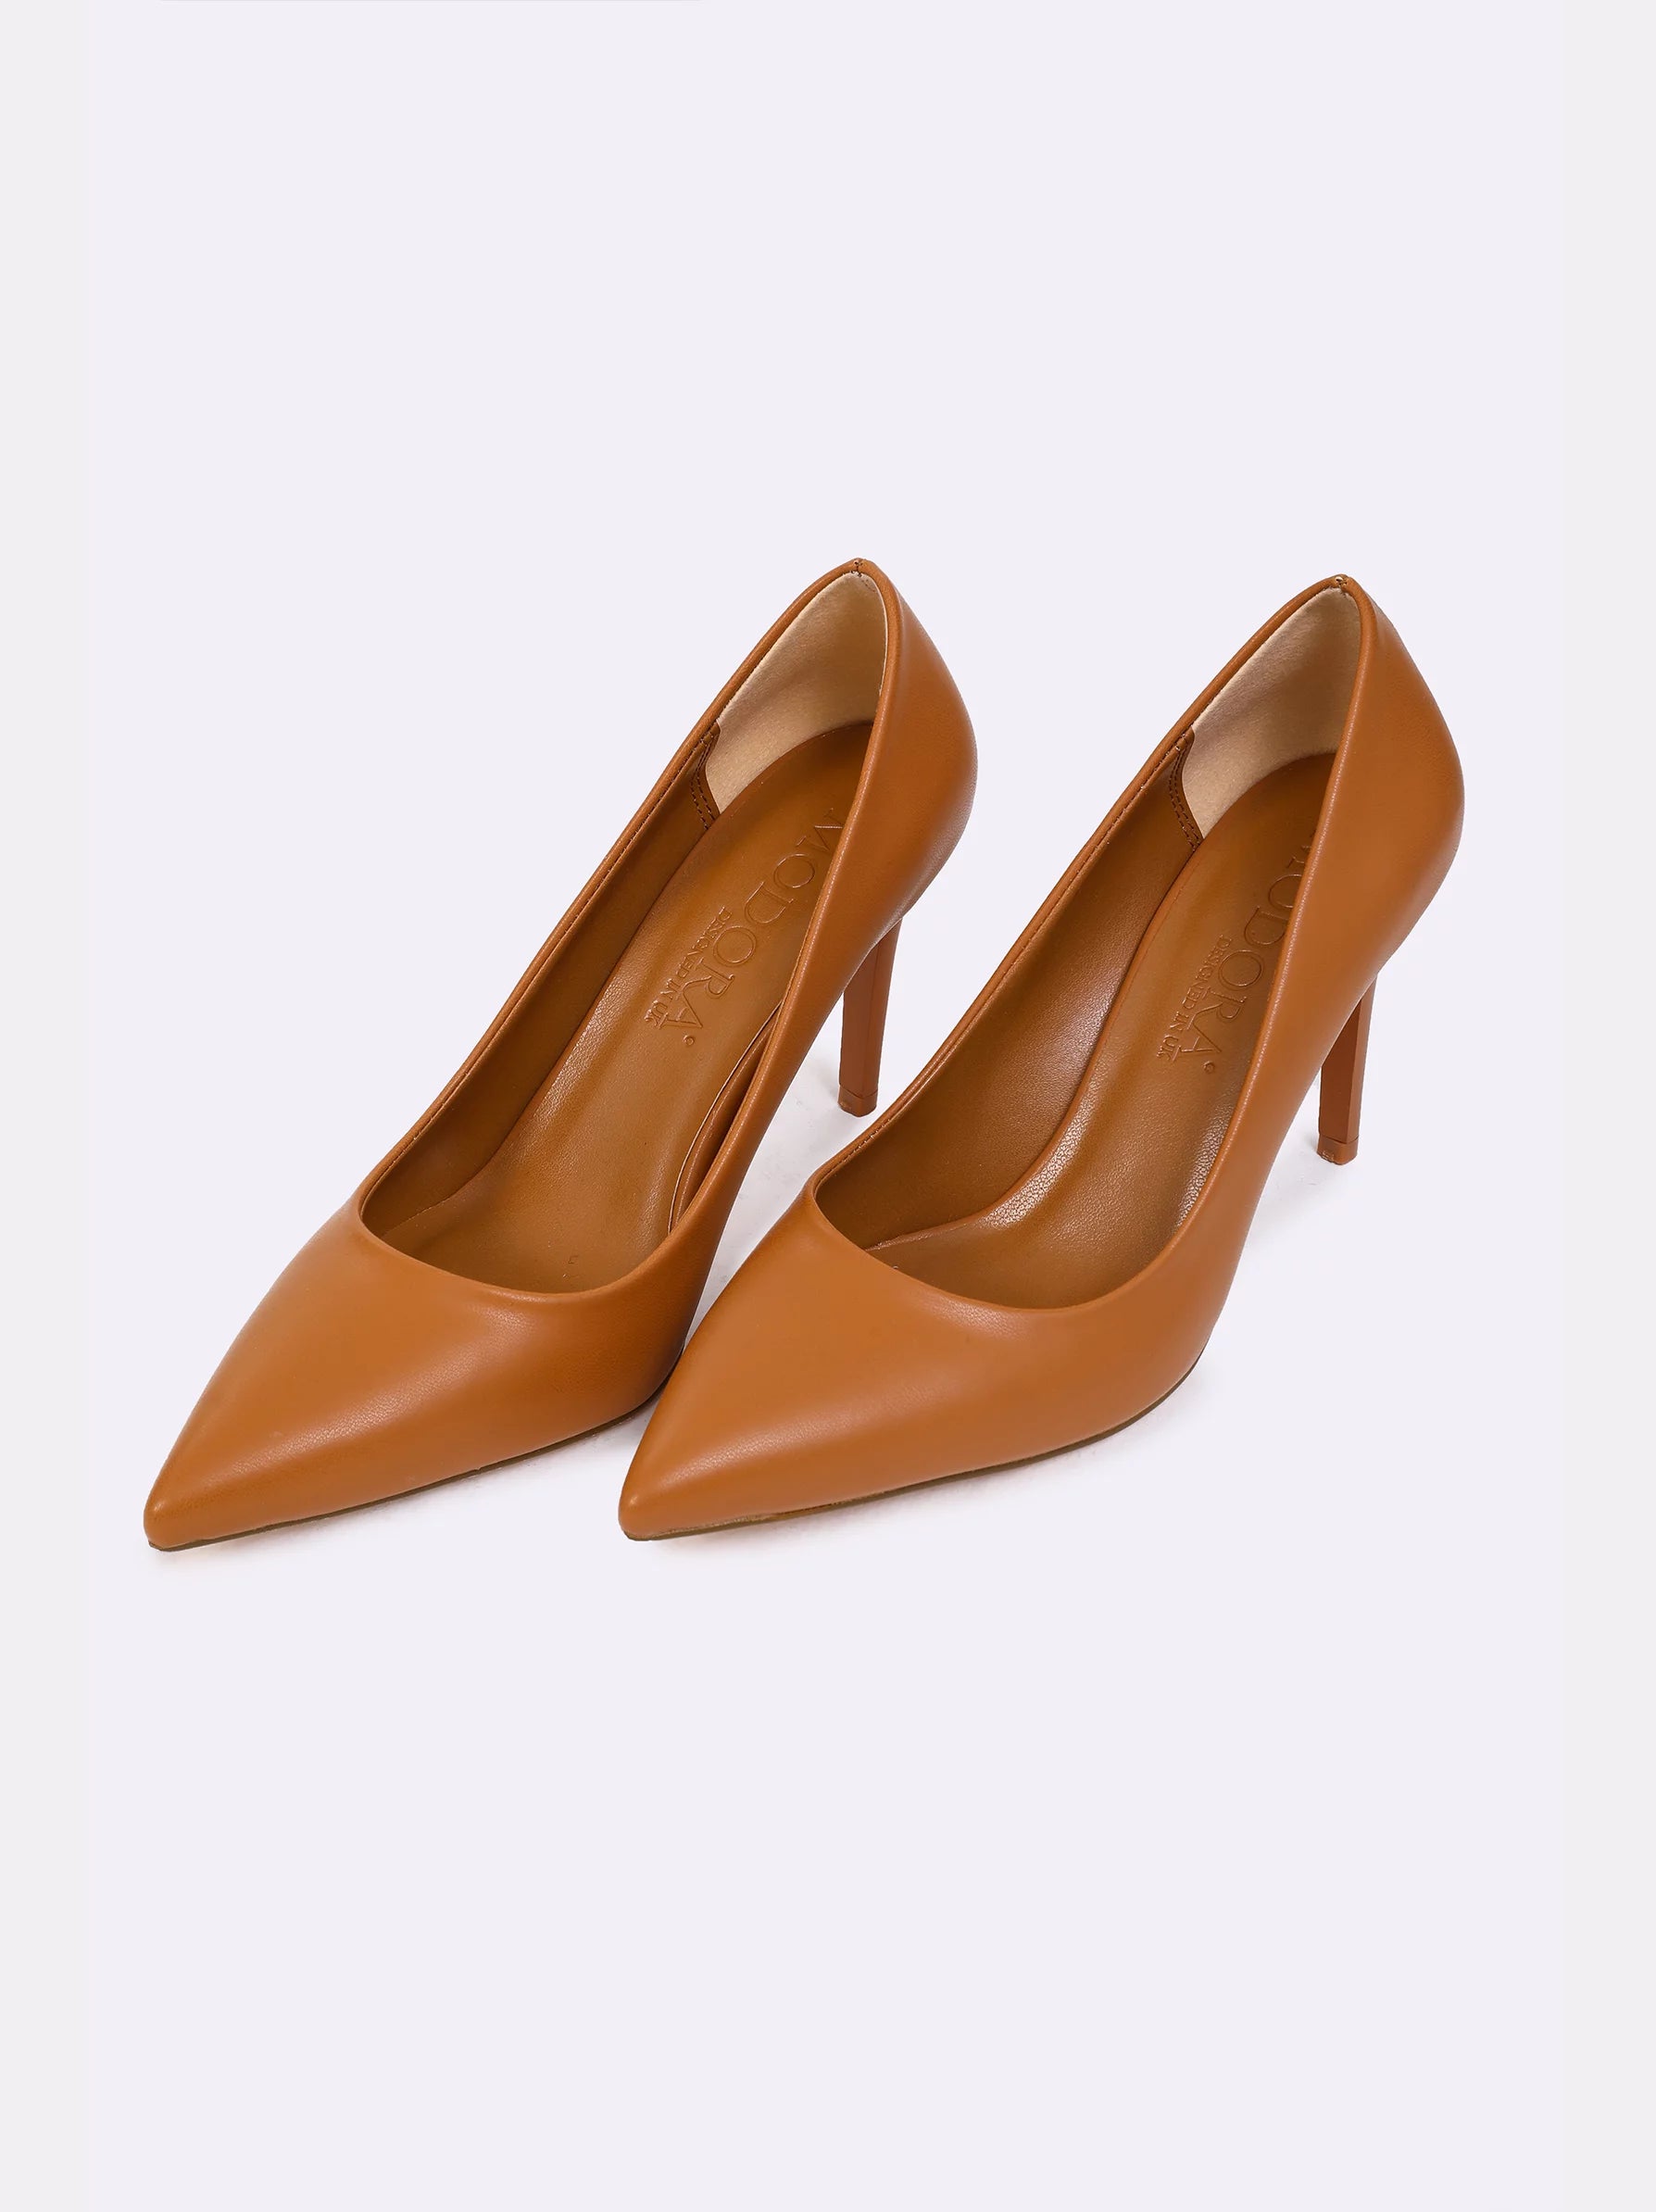 Camel Colored Heels | ShopStyle